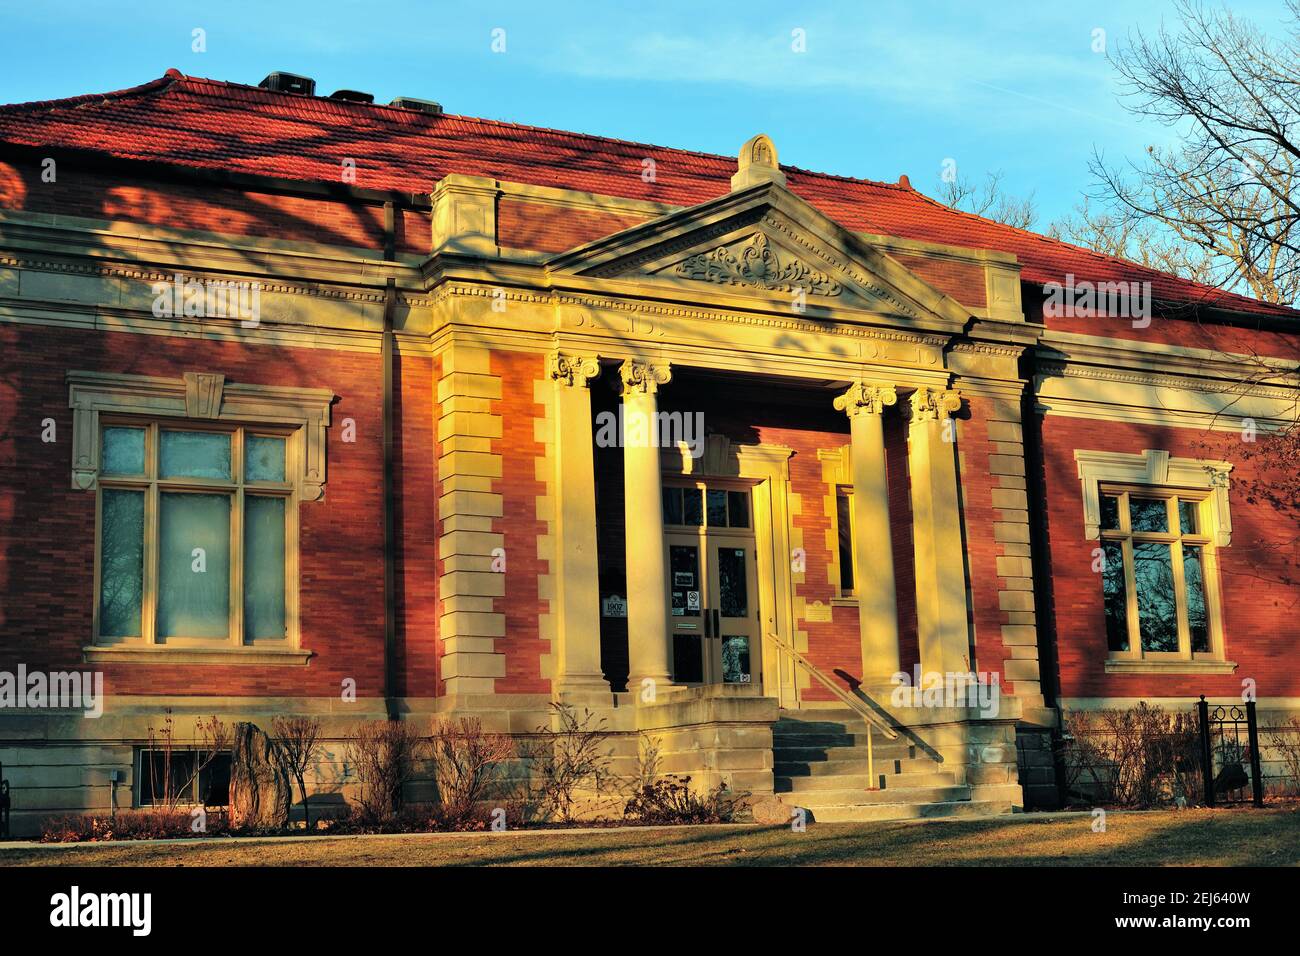 Elgin, Illinois, USA. The Elgin Public Museum of Natural History and Anthropology located within Lords Park. Stock Photo